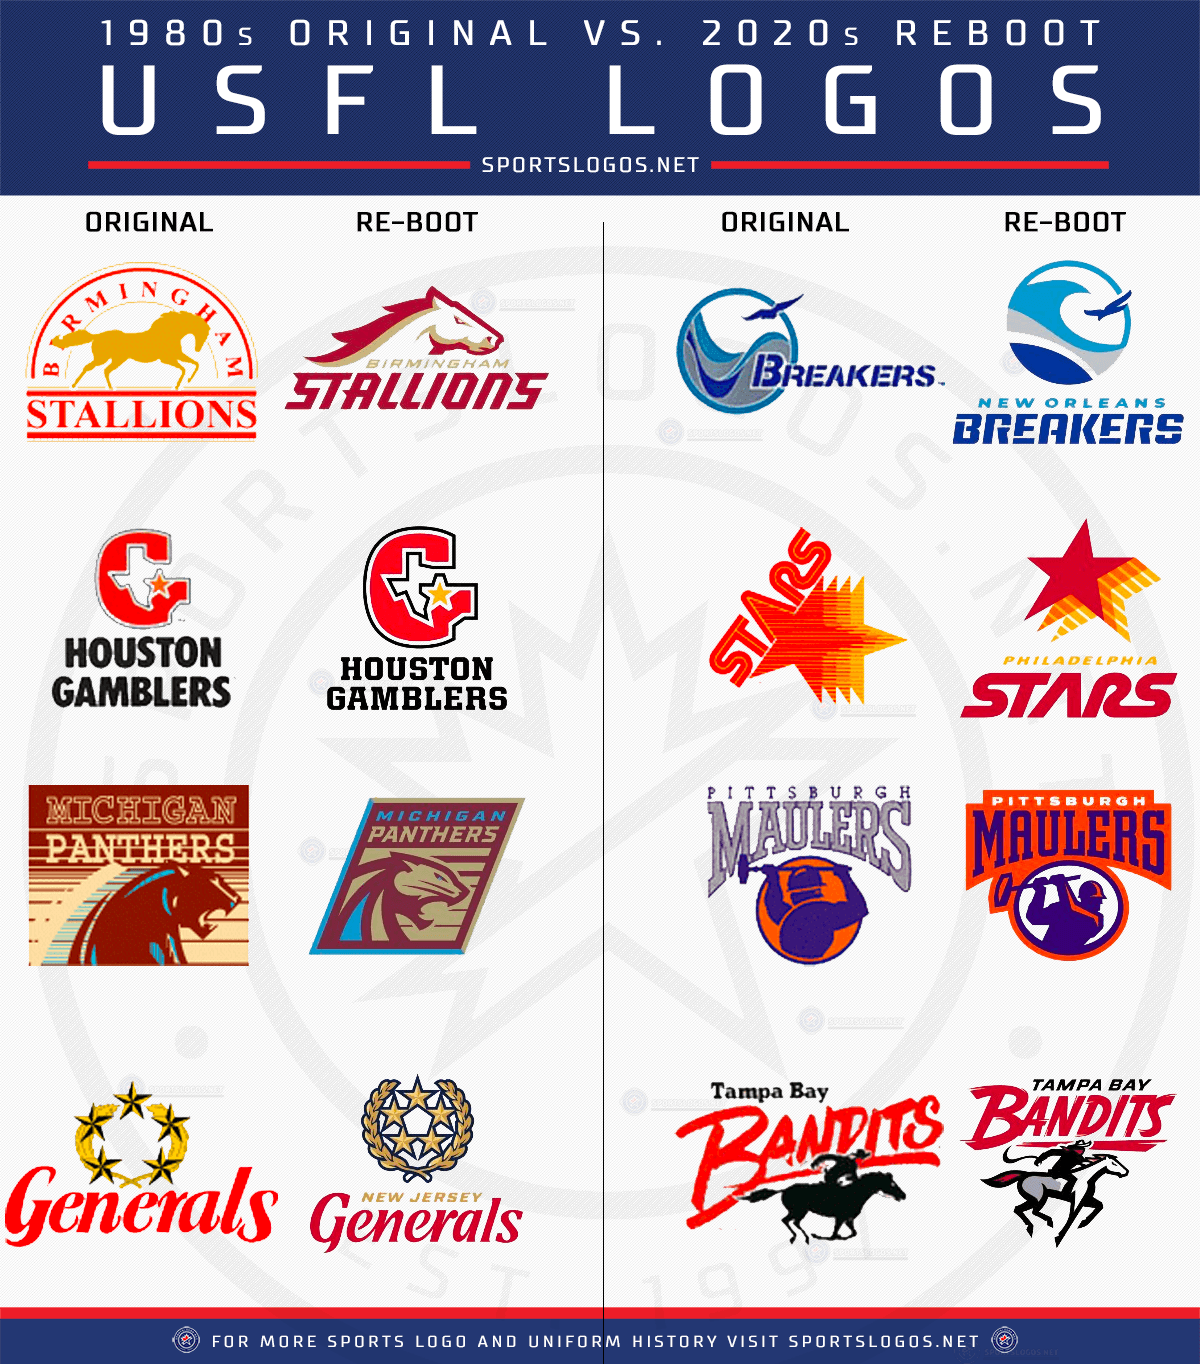 Chris Creamer  SportsLogos.Net on X: 'I gotta say, the new USFL really did  a great job of bringing the retro '80s look of the original league into  2022. Each team kept